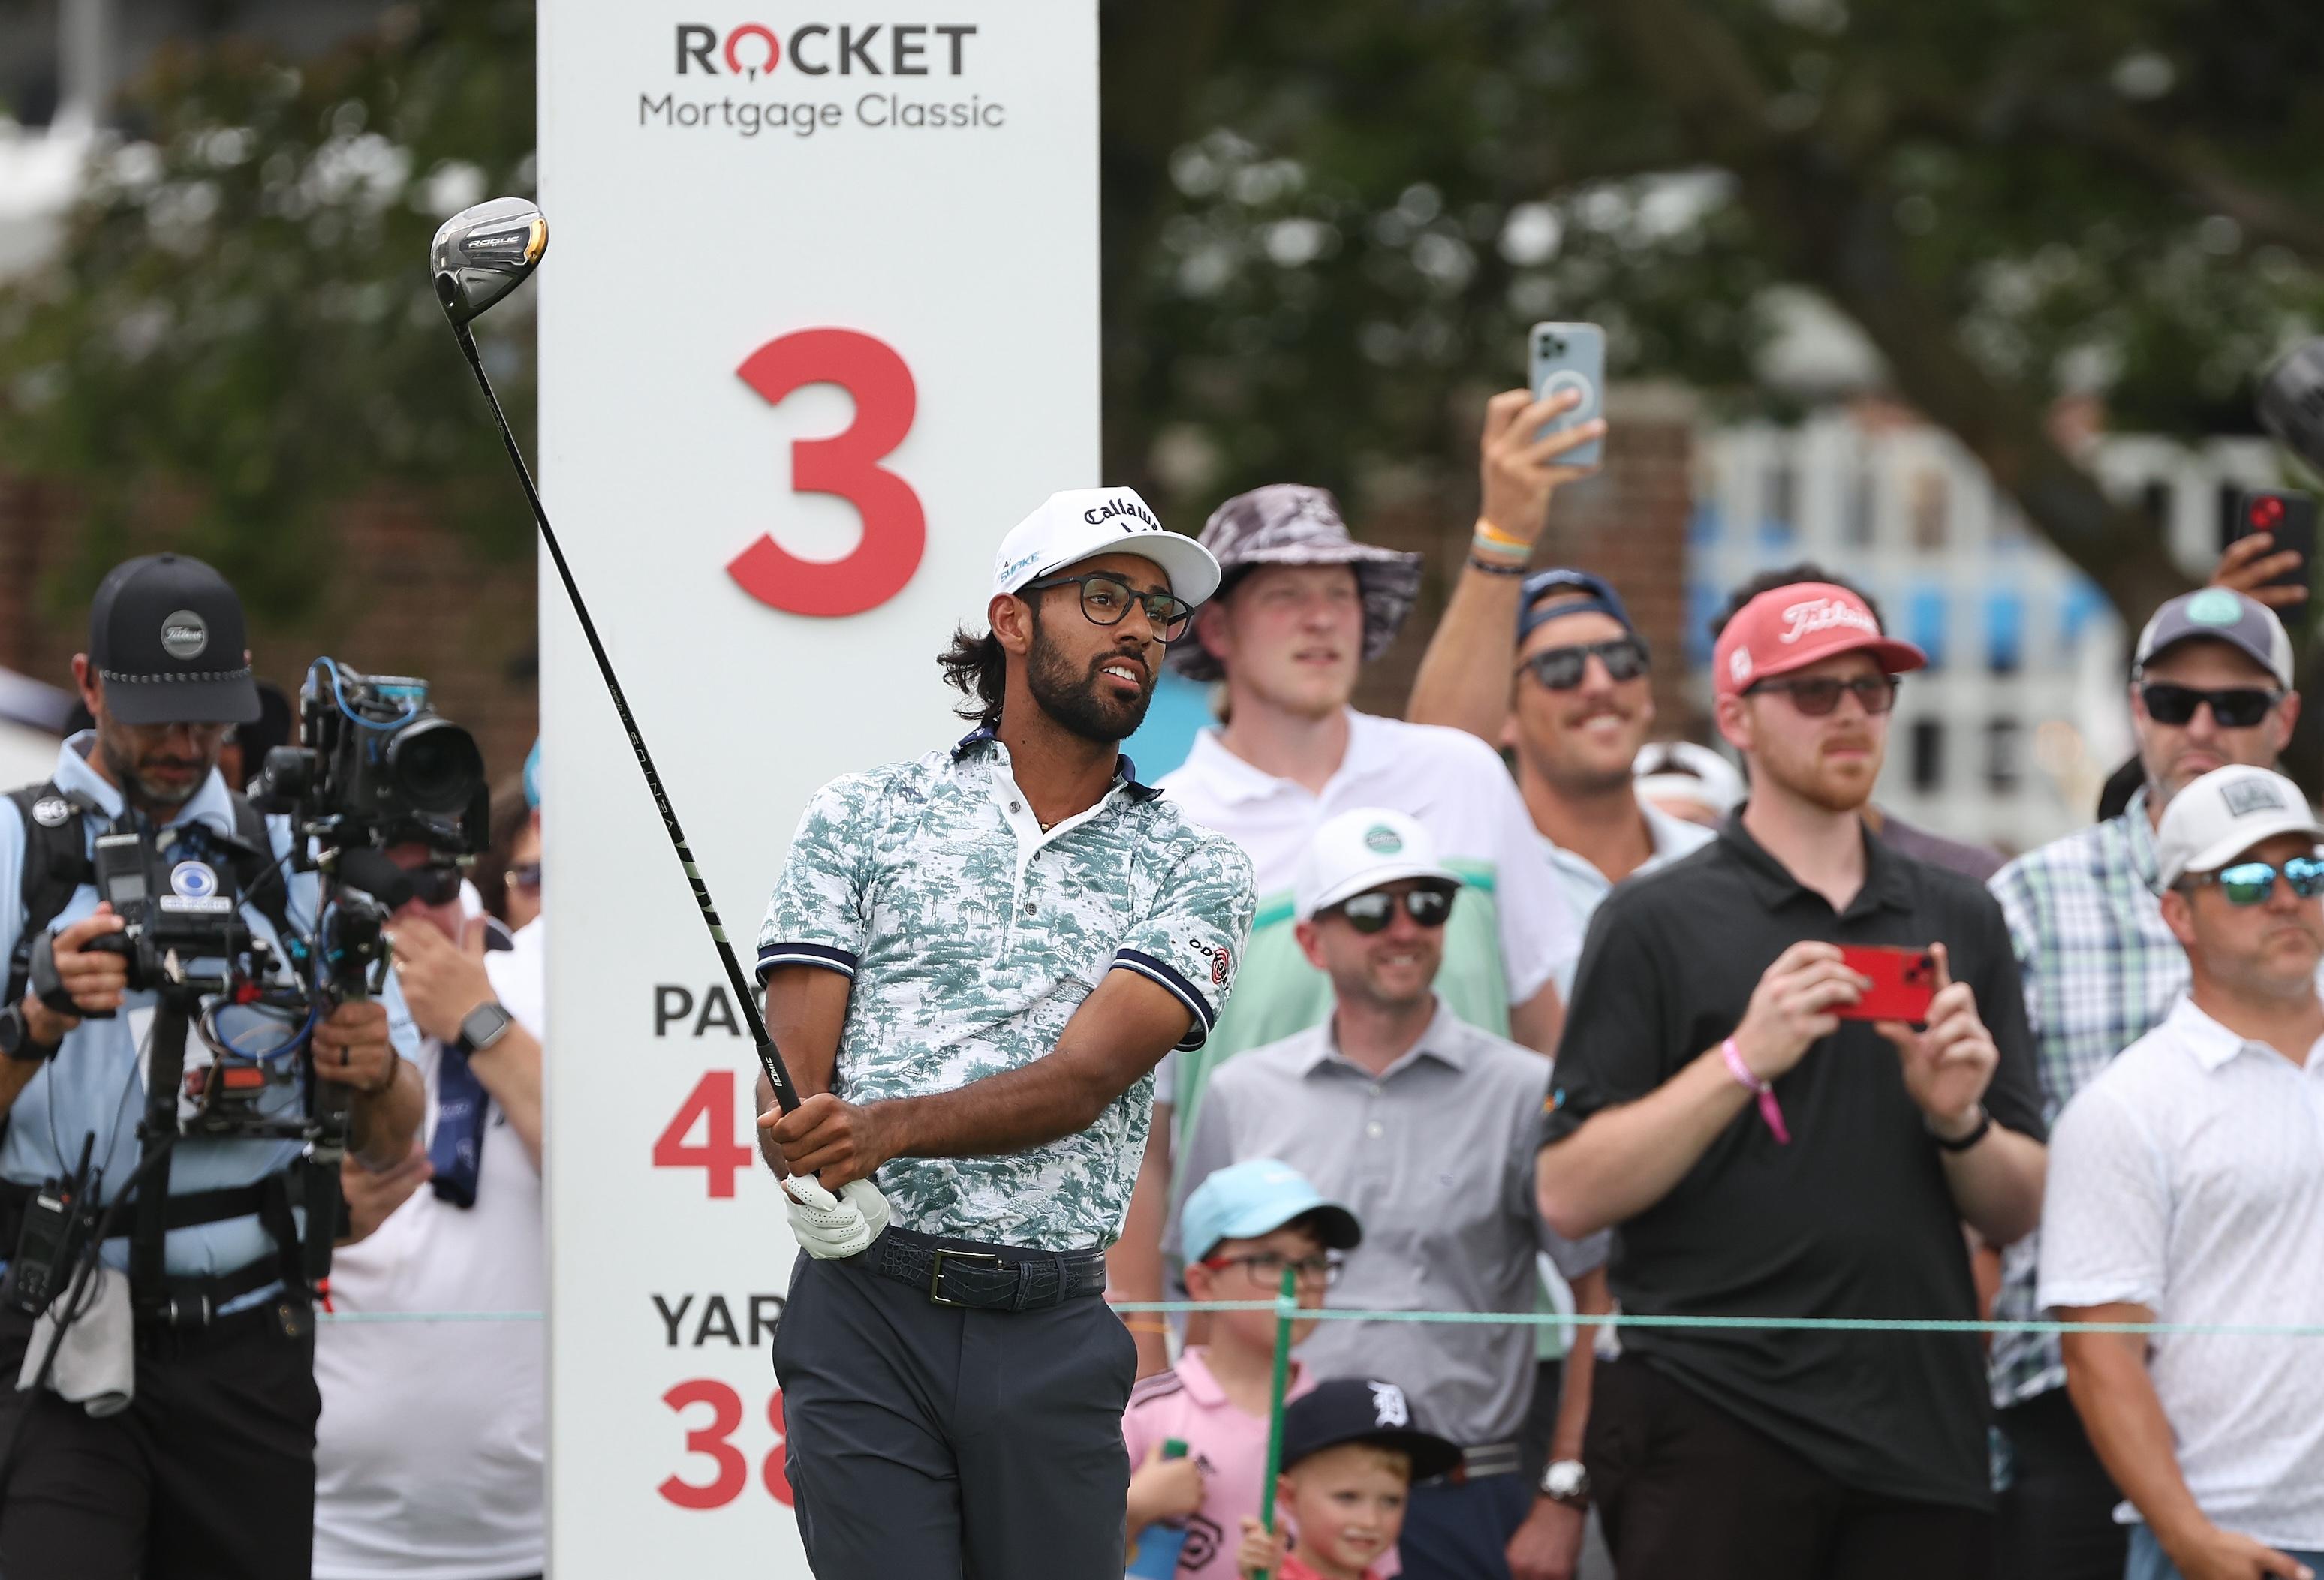 Akshay Bhatia and Aaron Rai Share Lead for 2nd Straight Day at Rocket Mortgage Classic